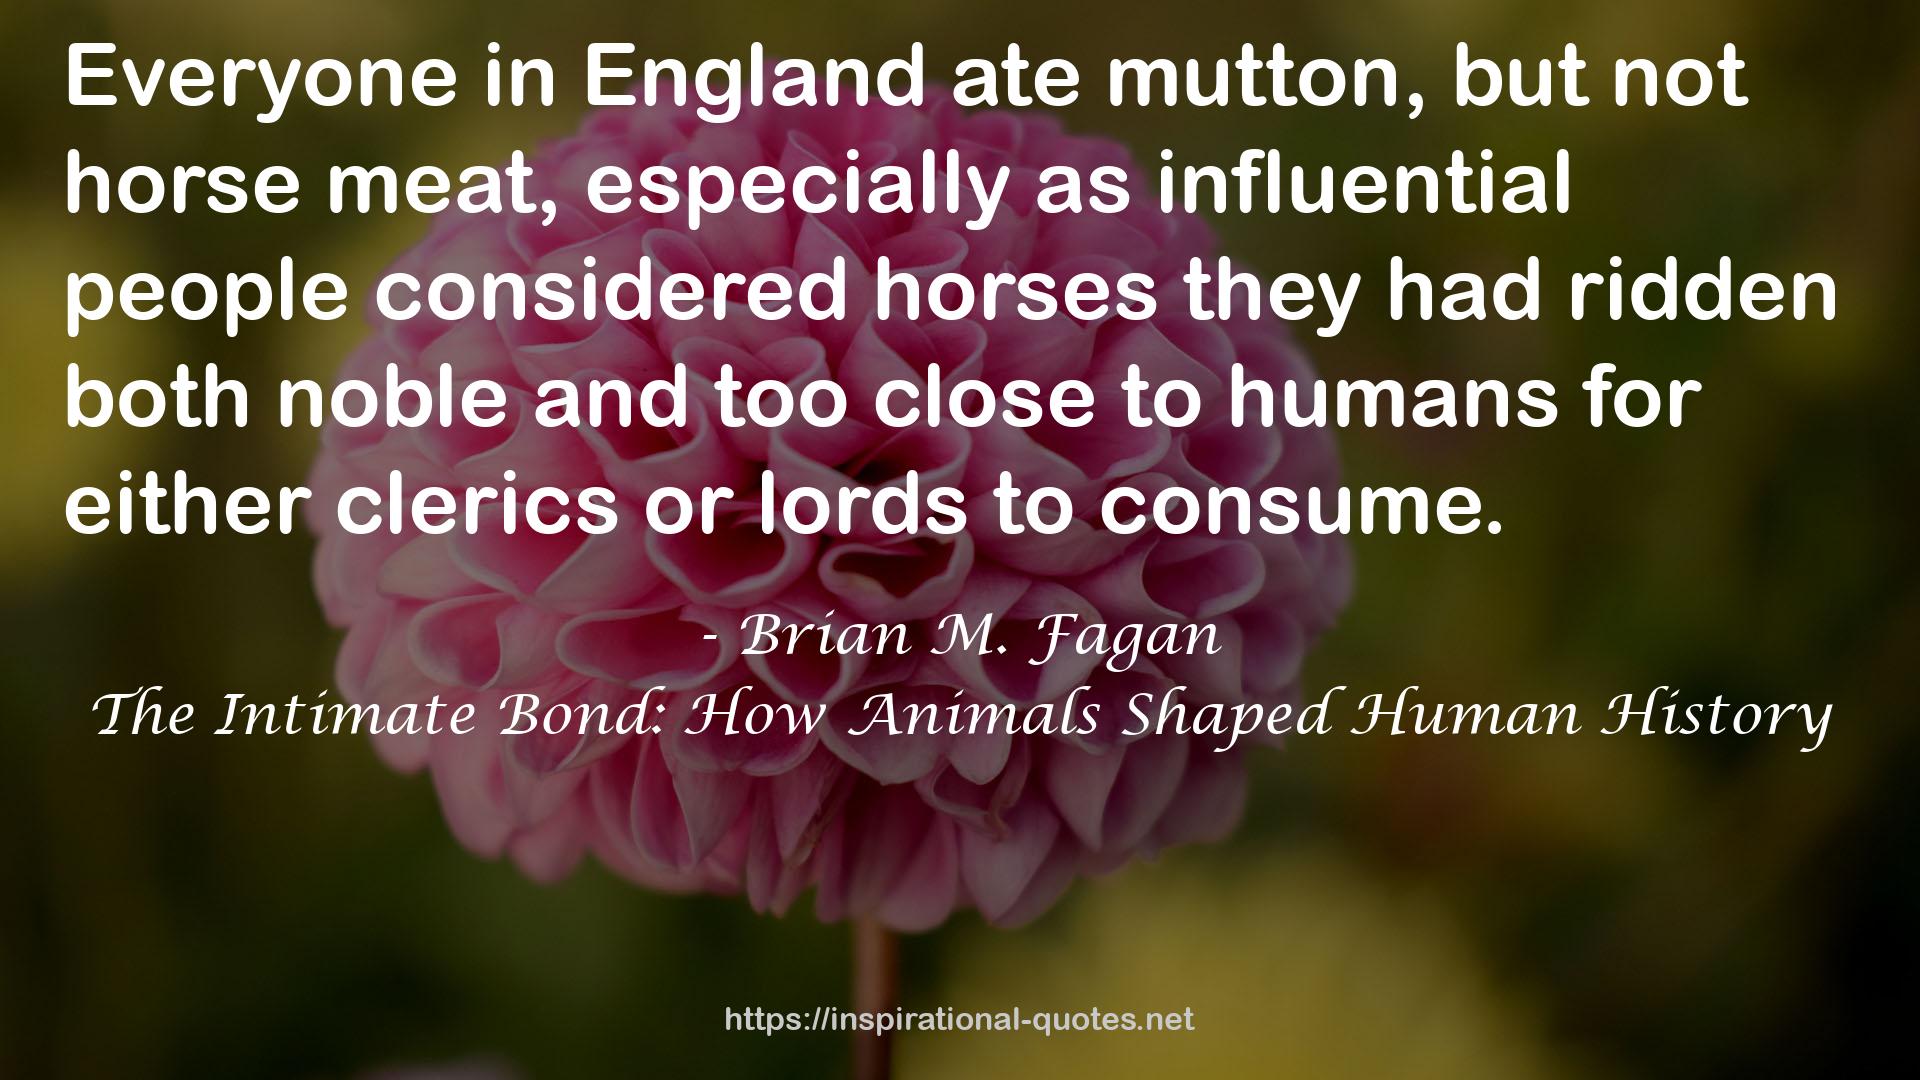 The Intimate Bond: How Animals Shaped Human History QUOTES